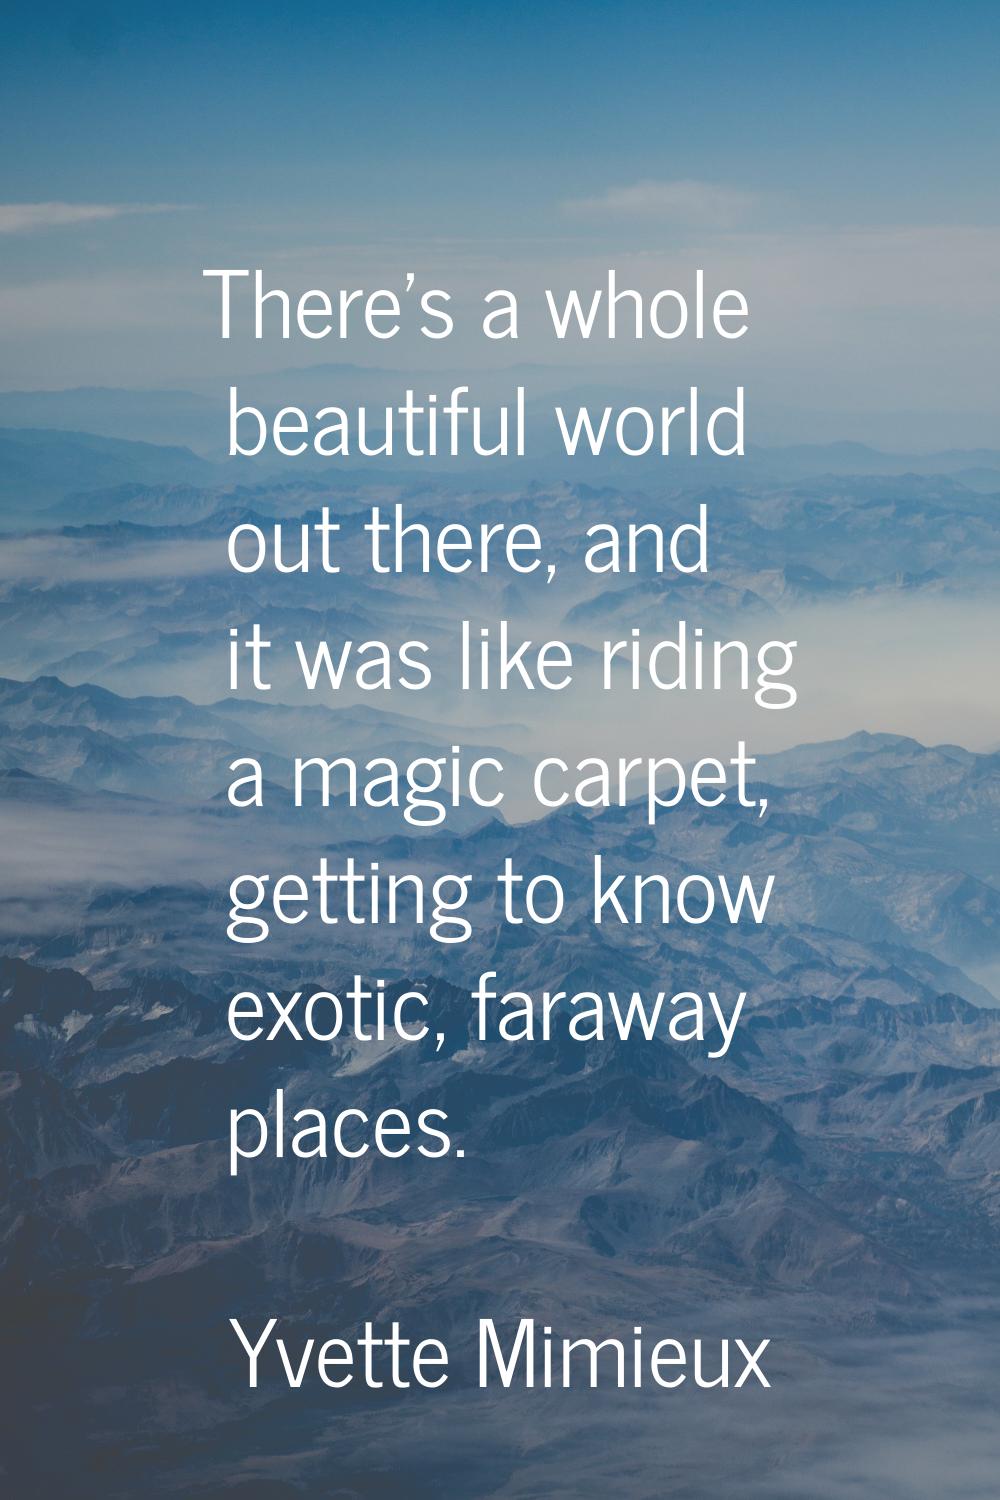 There's a whole beautiful world out there, and it was like riding a magic carpet, getting to know e